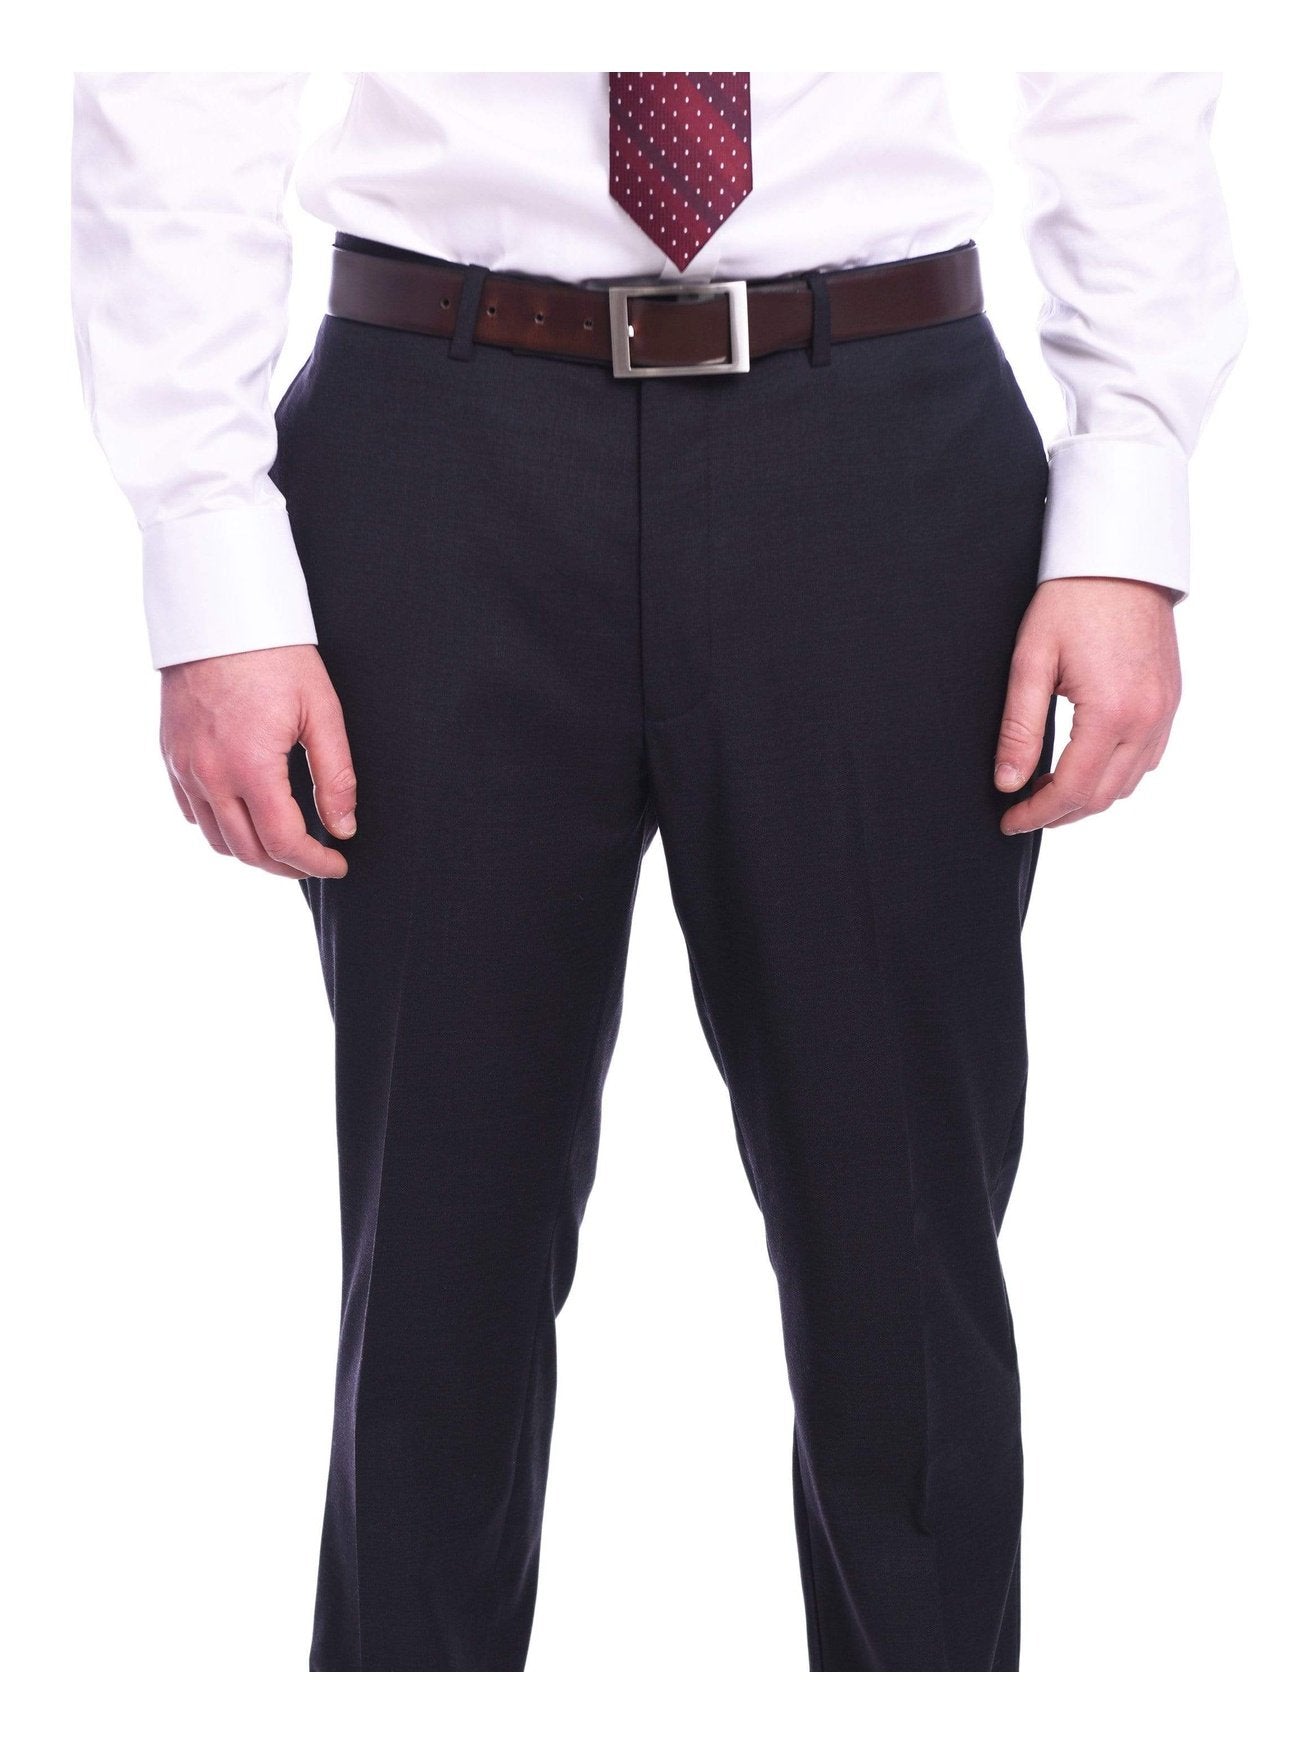 Buy Charcoal Gray Suit Online In India -  India